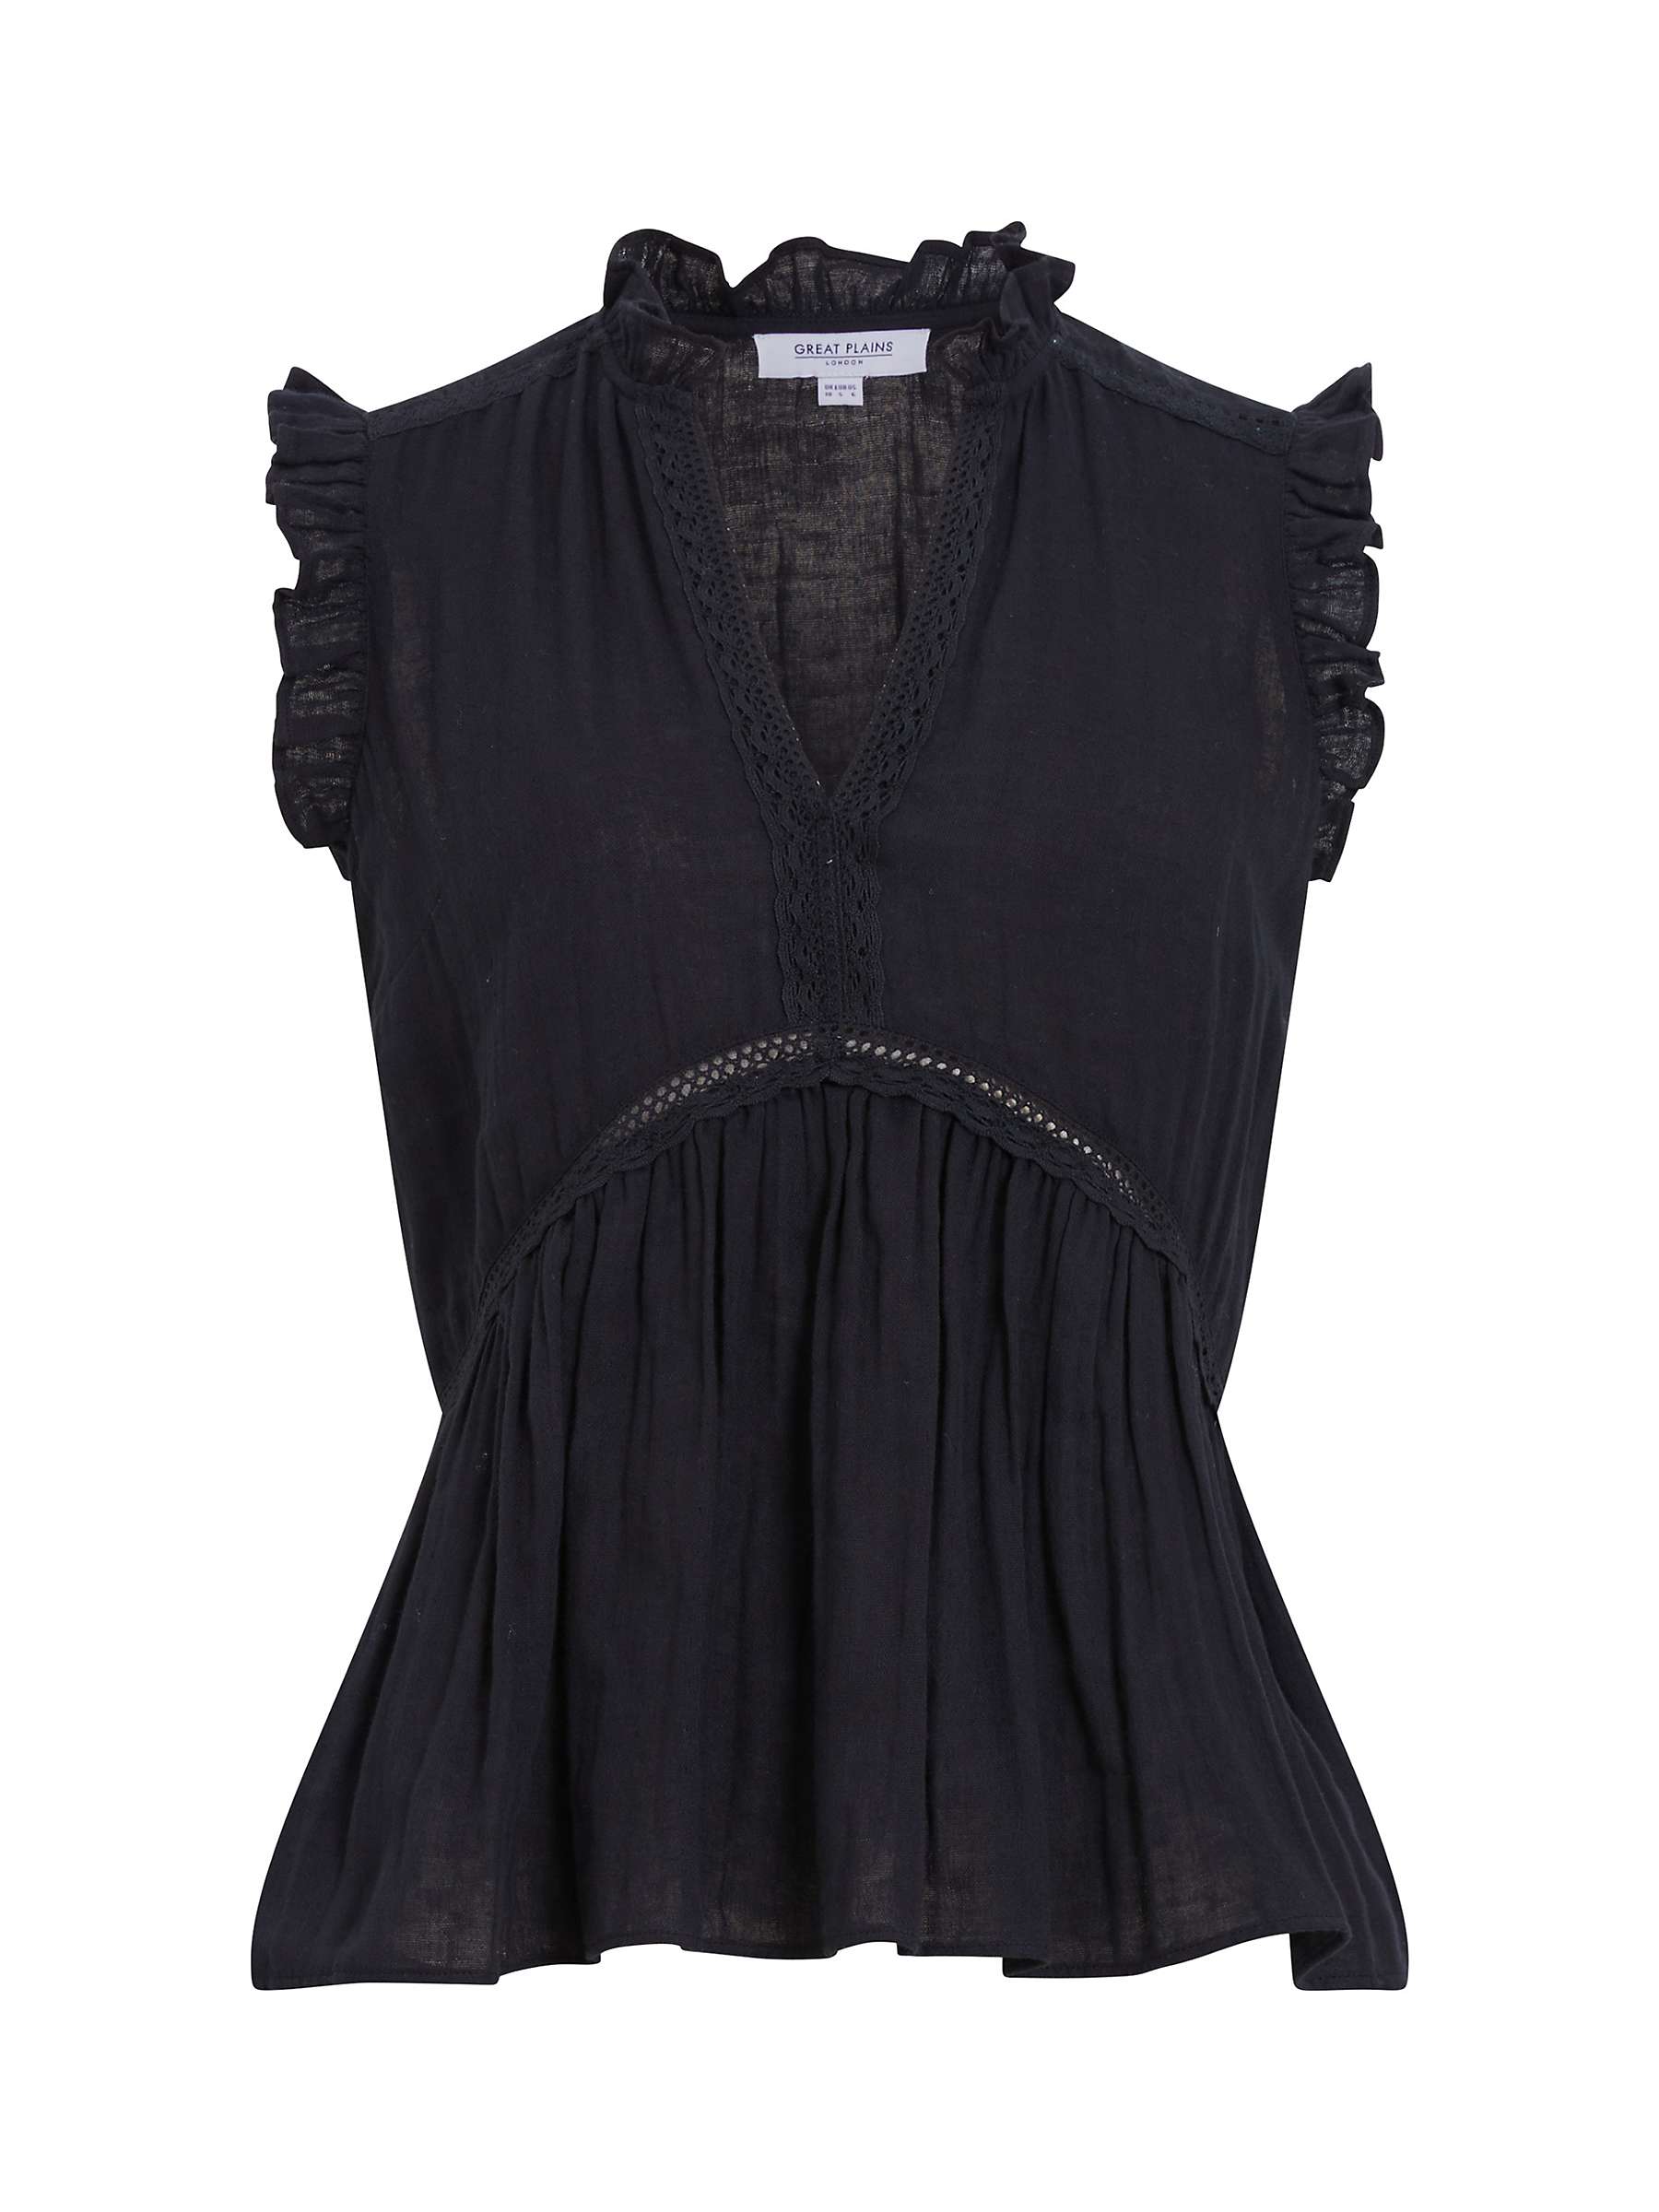 Buy Great Plains Double Cotton Sleeveless Top, Black Online at johnlewis.com